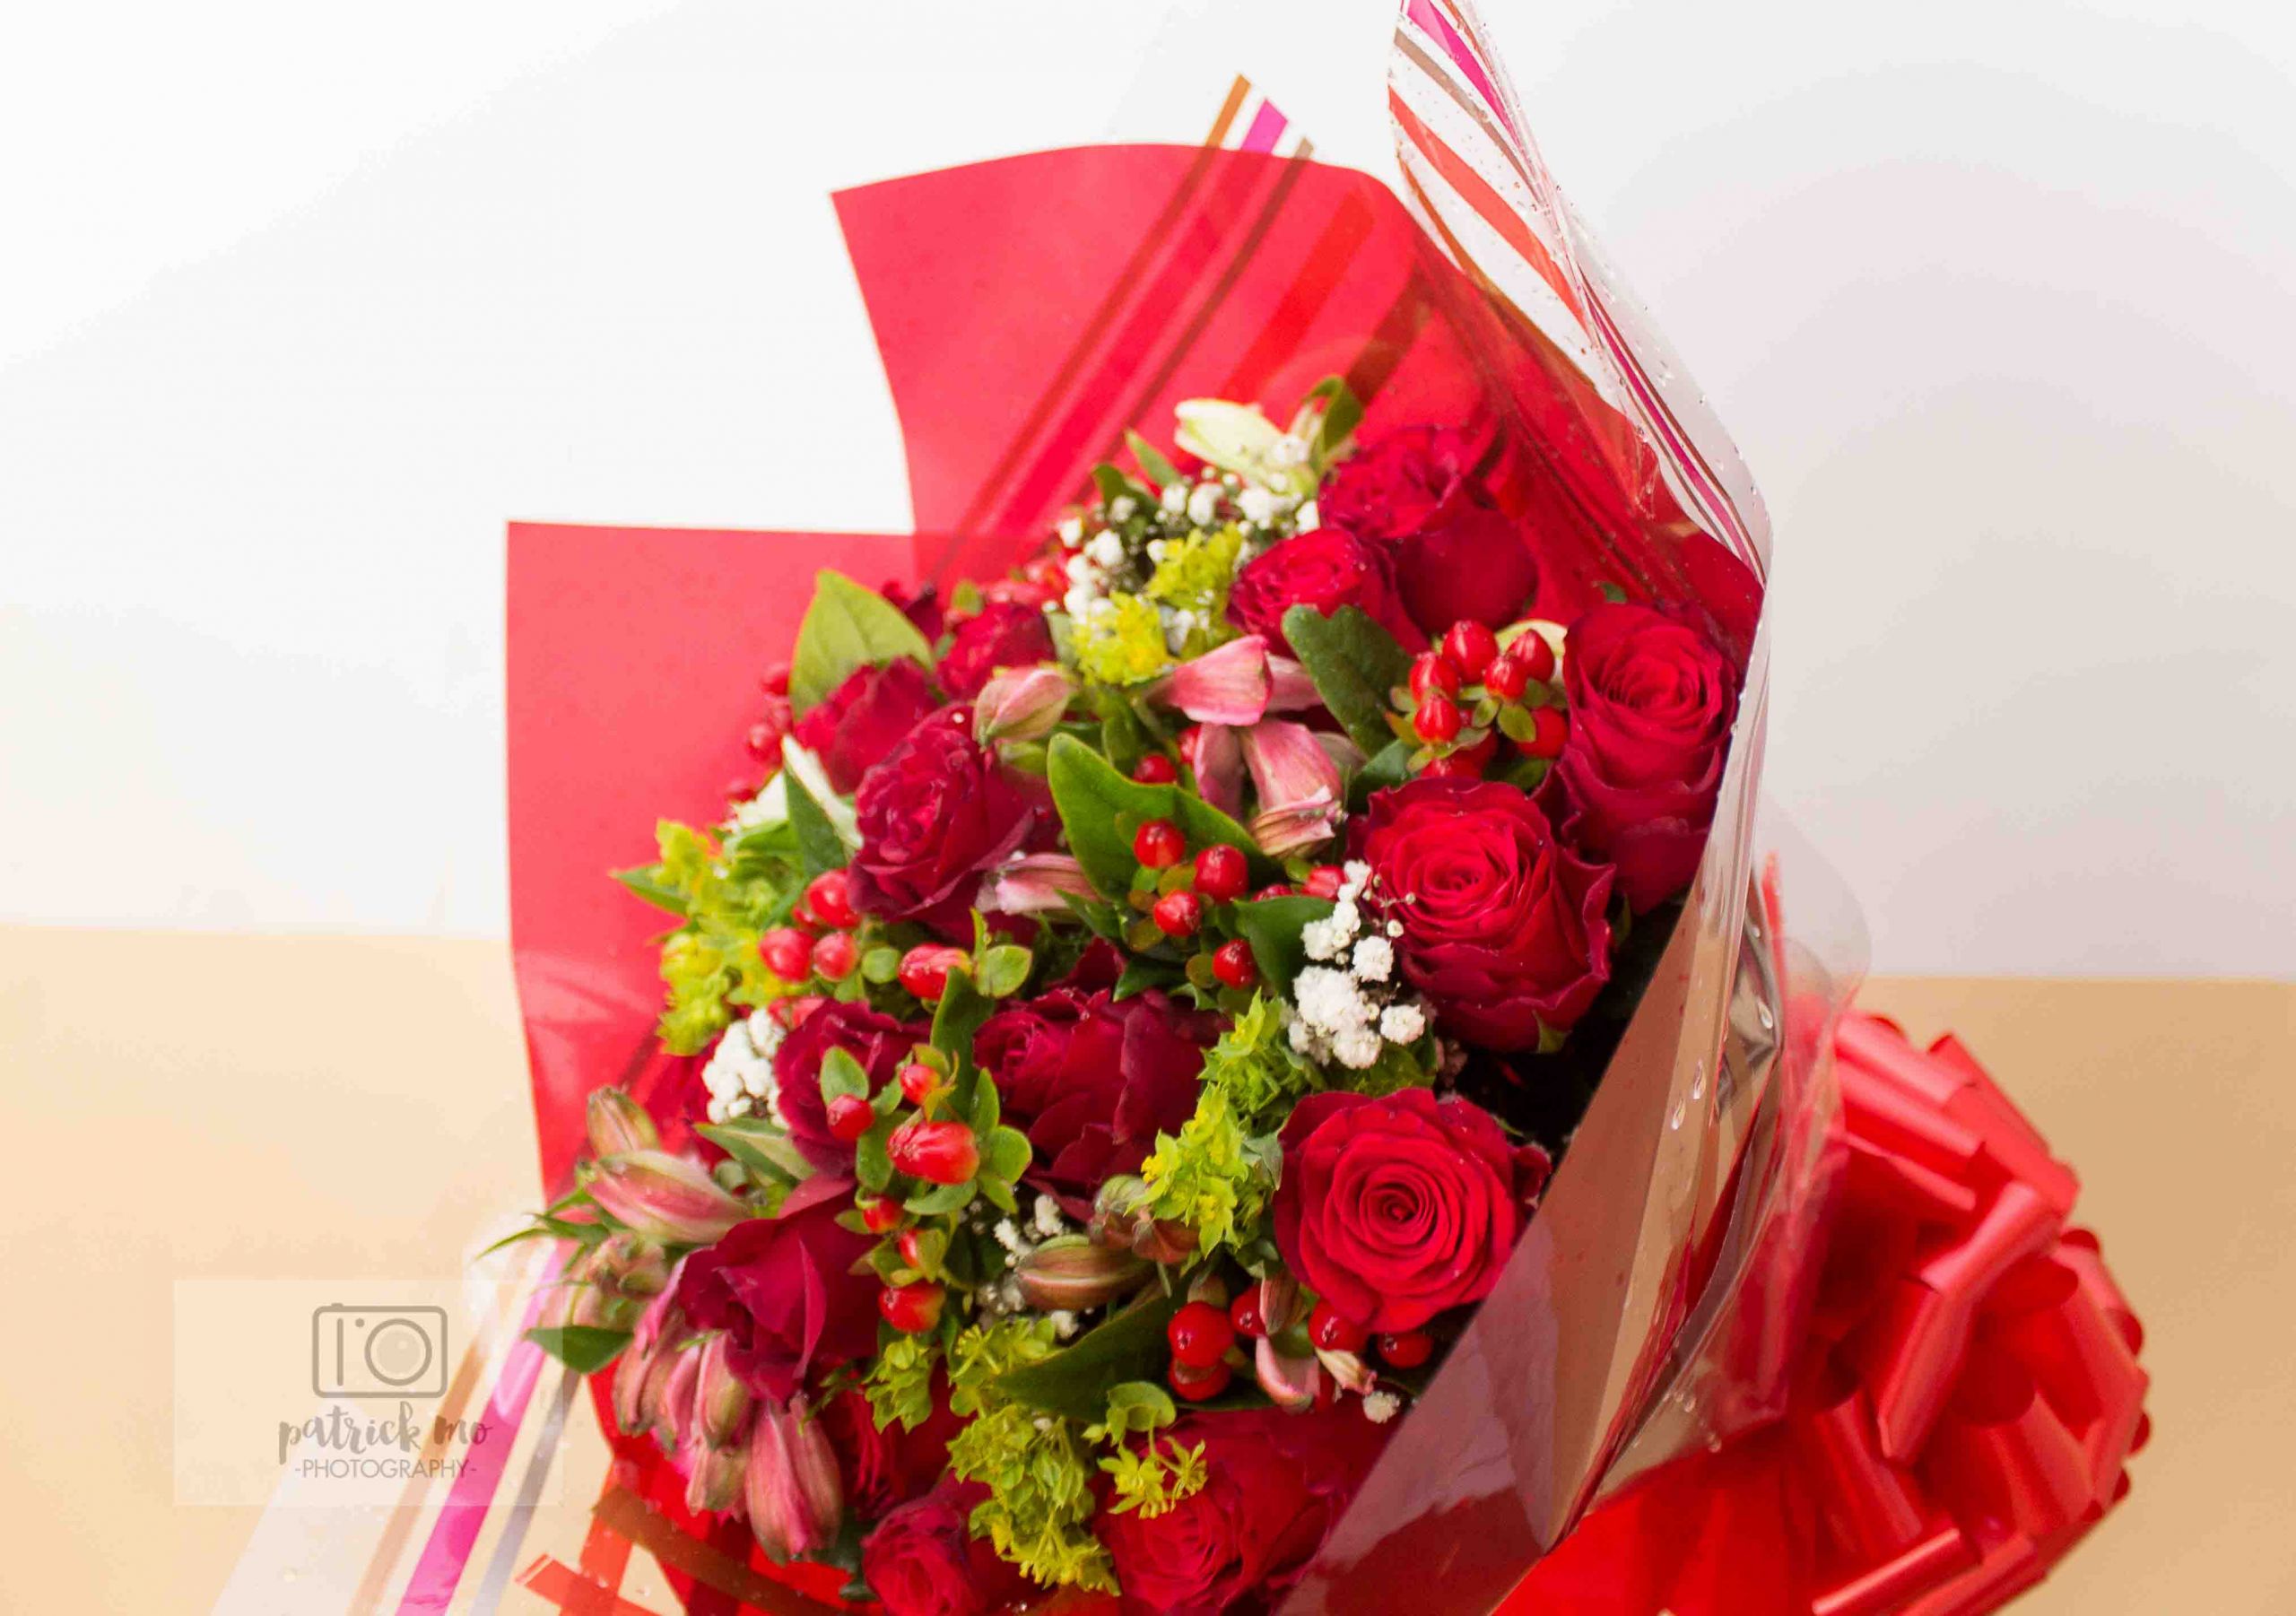 Romantic Valentines Day Gift For Her
 What Are The Best Valentine s Day Gifts for Her Techicy